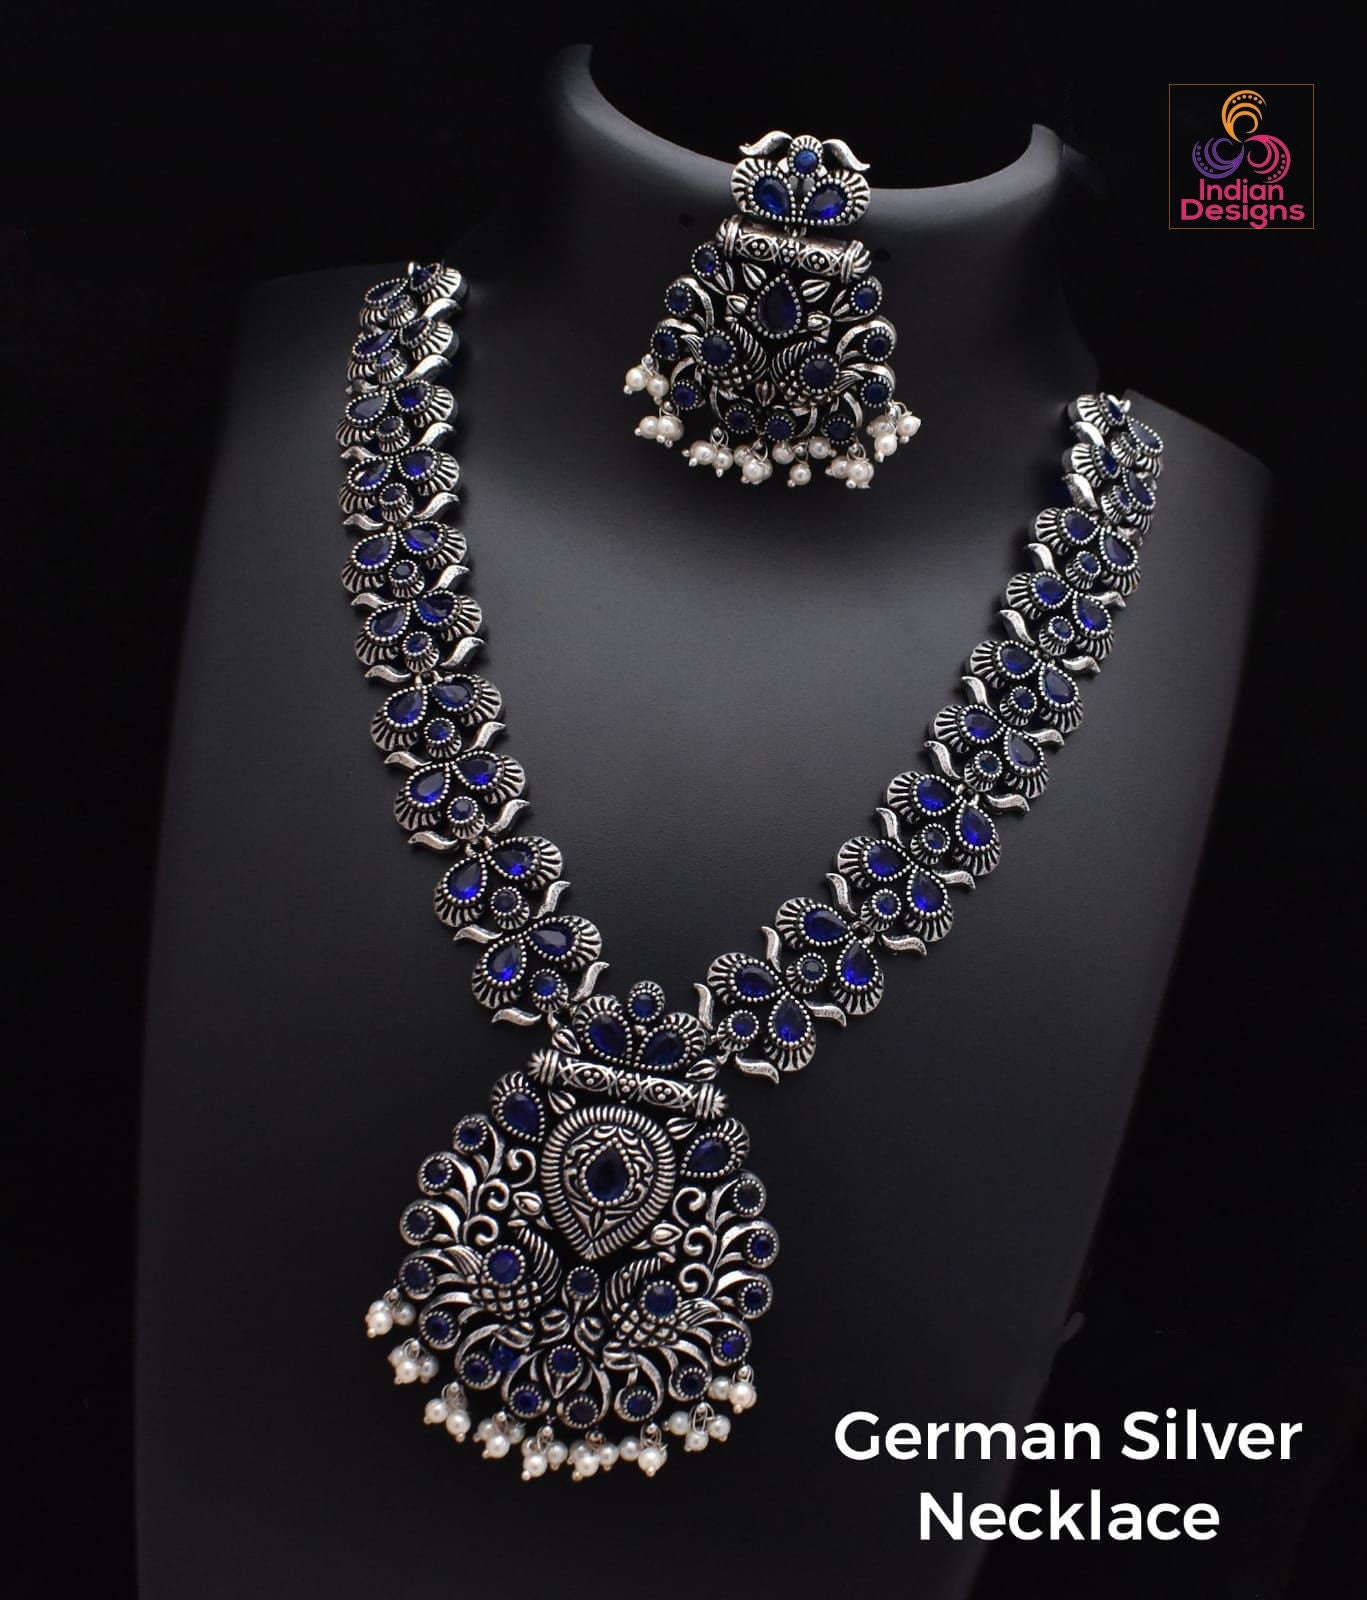 Oxidized German Silver Jewelry | Oxidized Silver jewellery for saree | Antique Silver necklace | Tribal Ethnic Necklace | Indian Jewelry